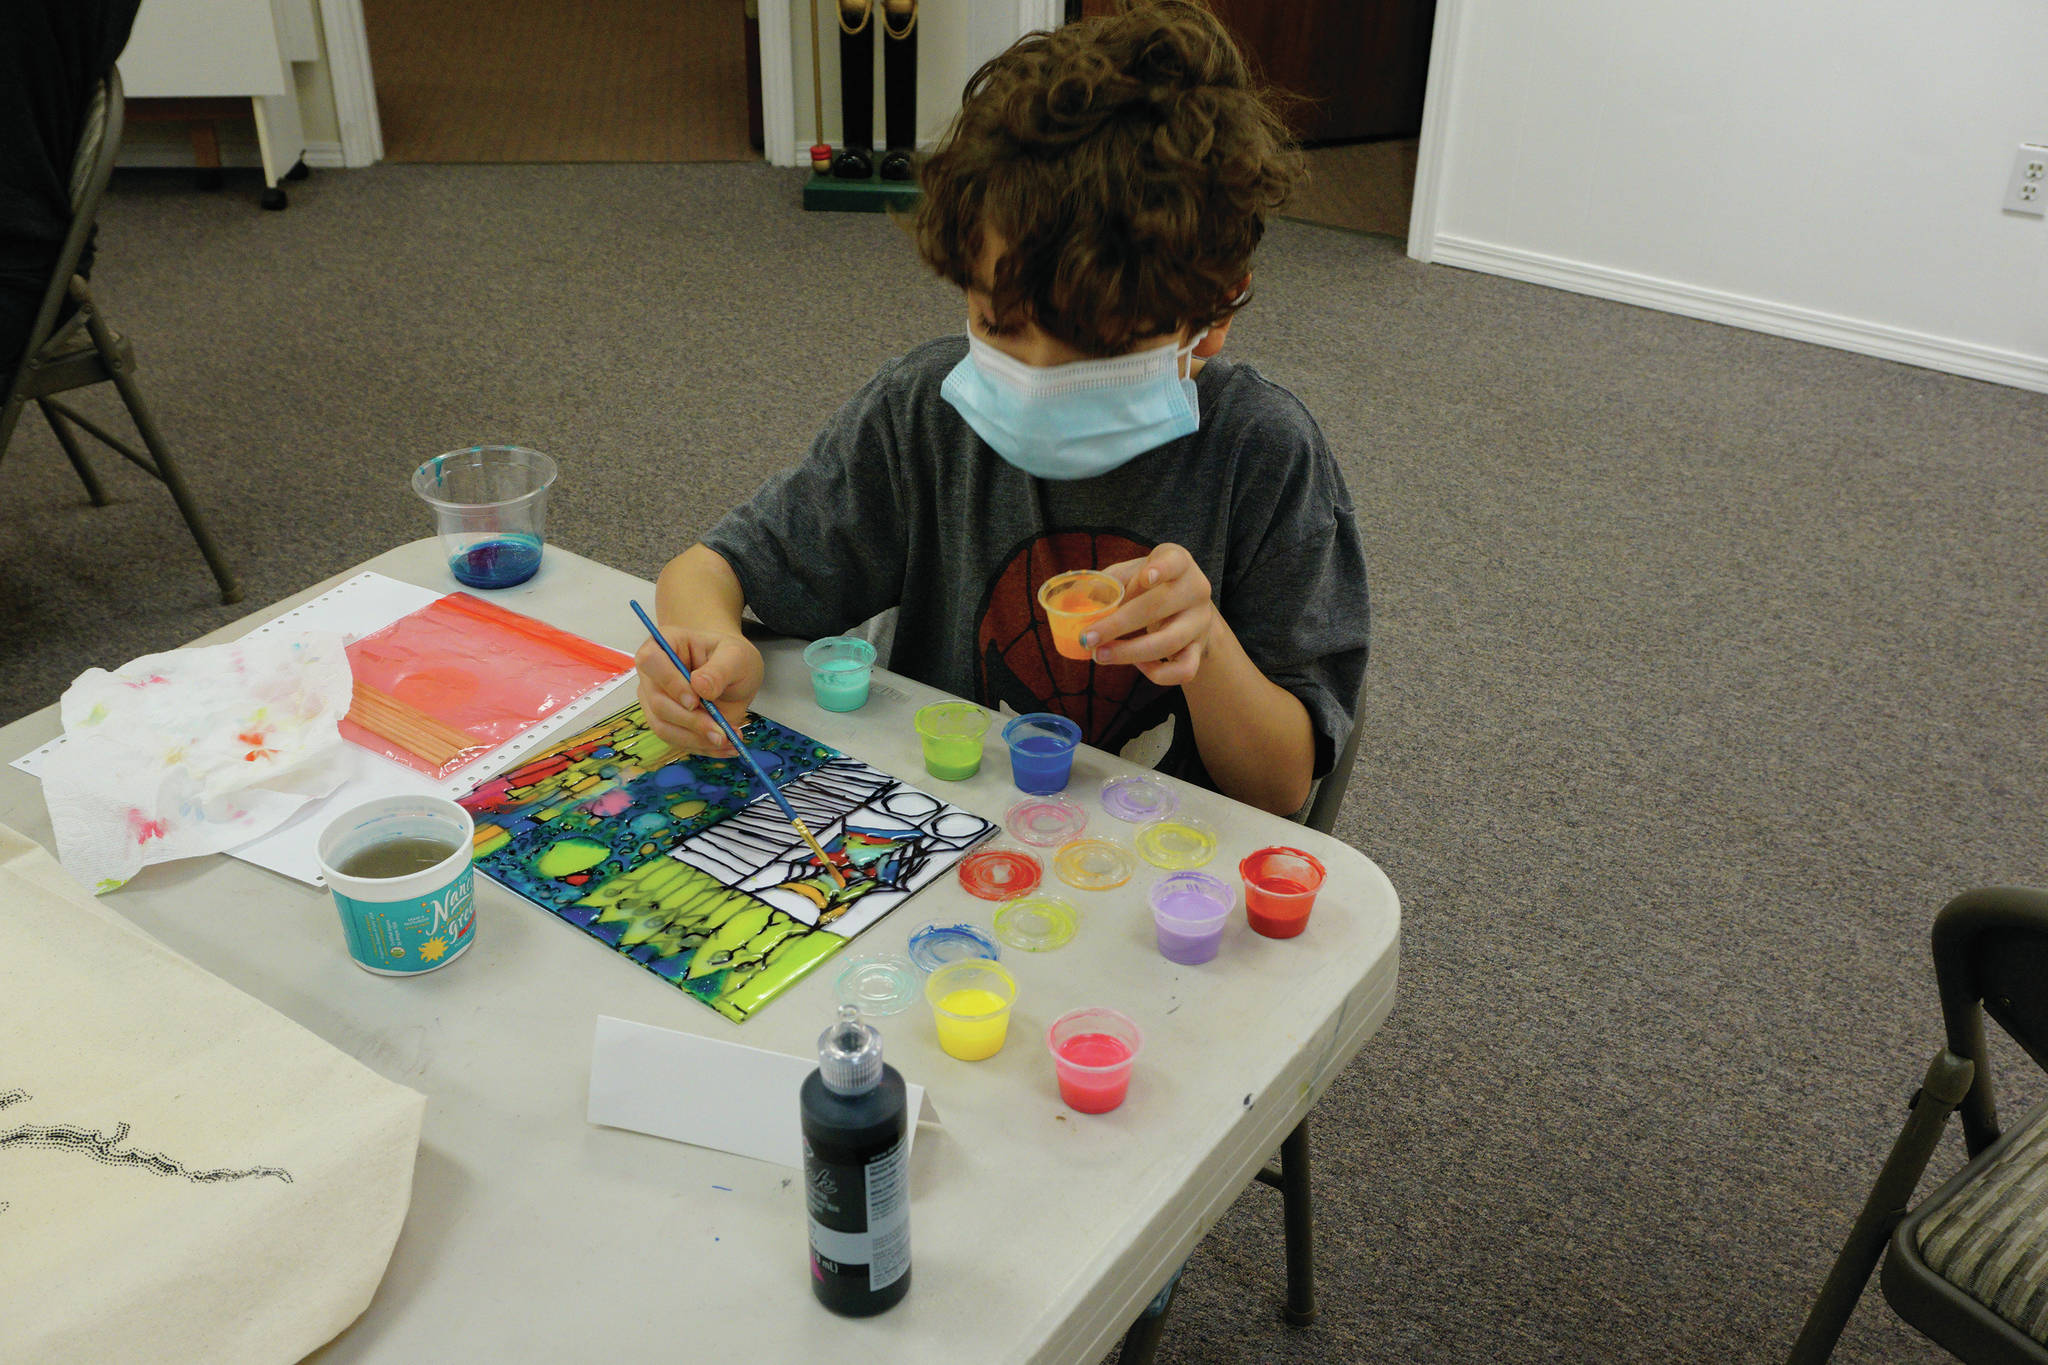 Ryder Chase, age 9, works on faux stained glass in Amy Komar’s socially-distant Art a la Carte class last Friday at the Homer Council on the Arts. Children in the class wore masks and worked at either end of long tables spaced apart. The young artists also made large origami stars that will be placed in store windows “for a dose of color therapy for the community,” Komar said. (Photo by Michael Armstrong/Homer News)